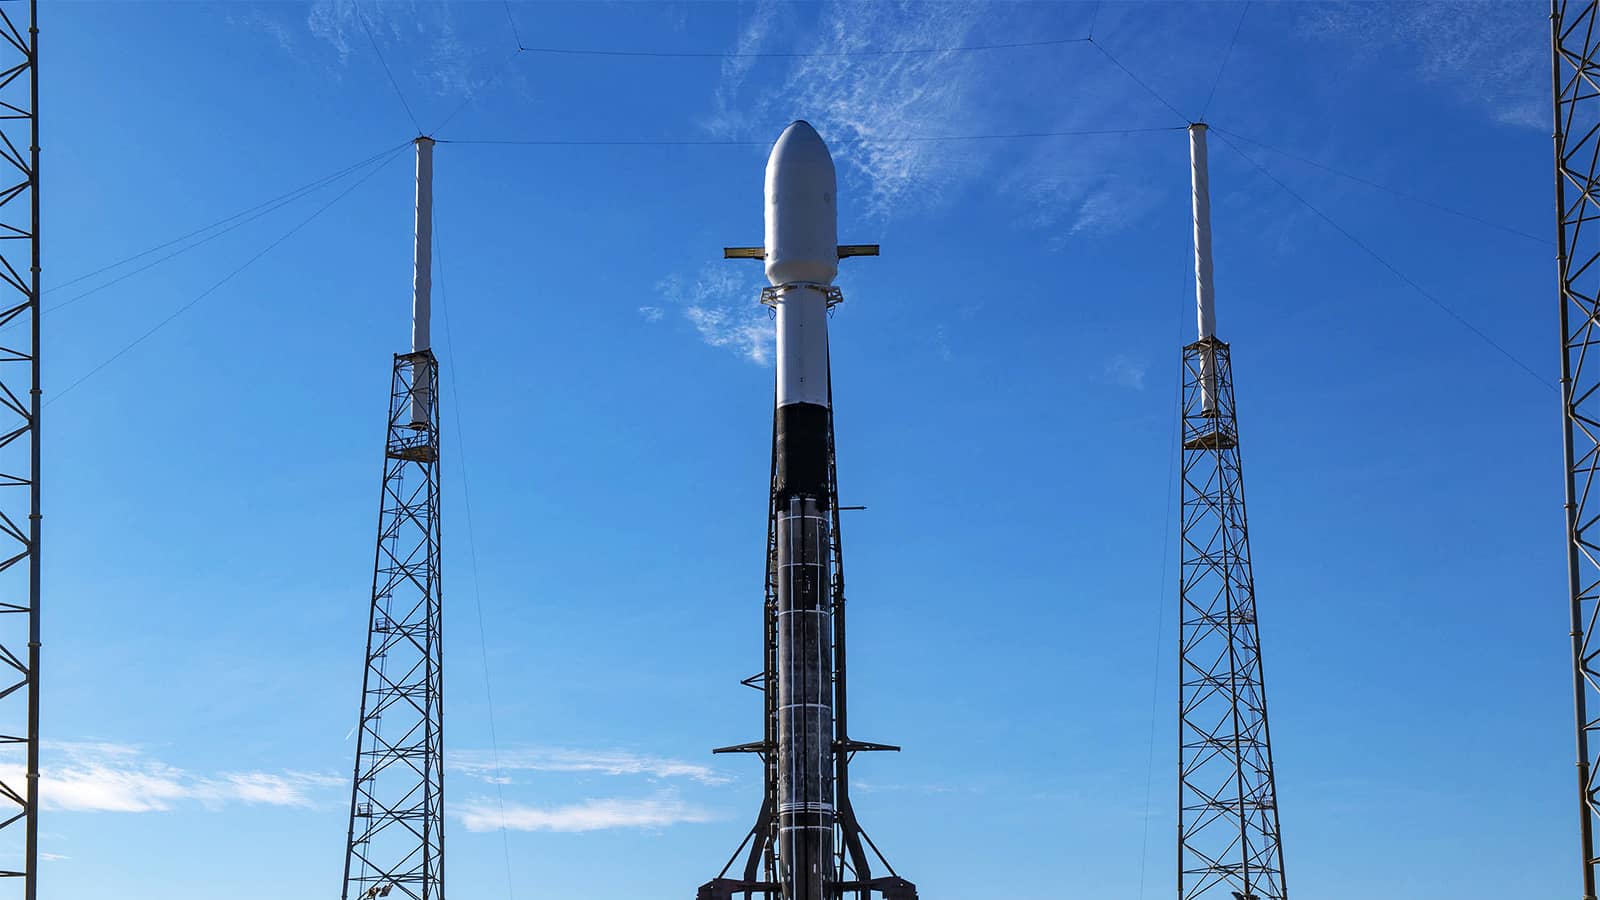 SpaceX Launched A Record of 143 Satellites